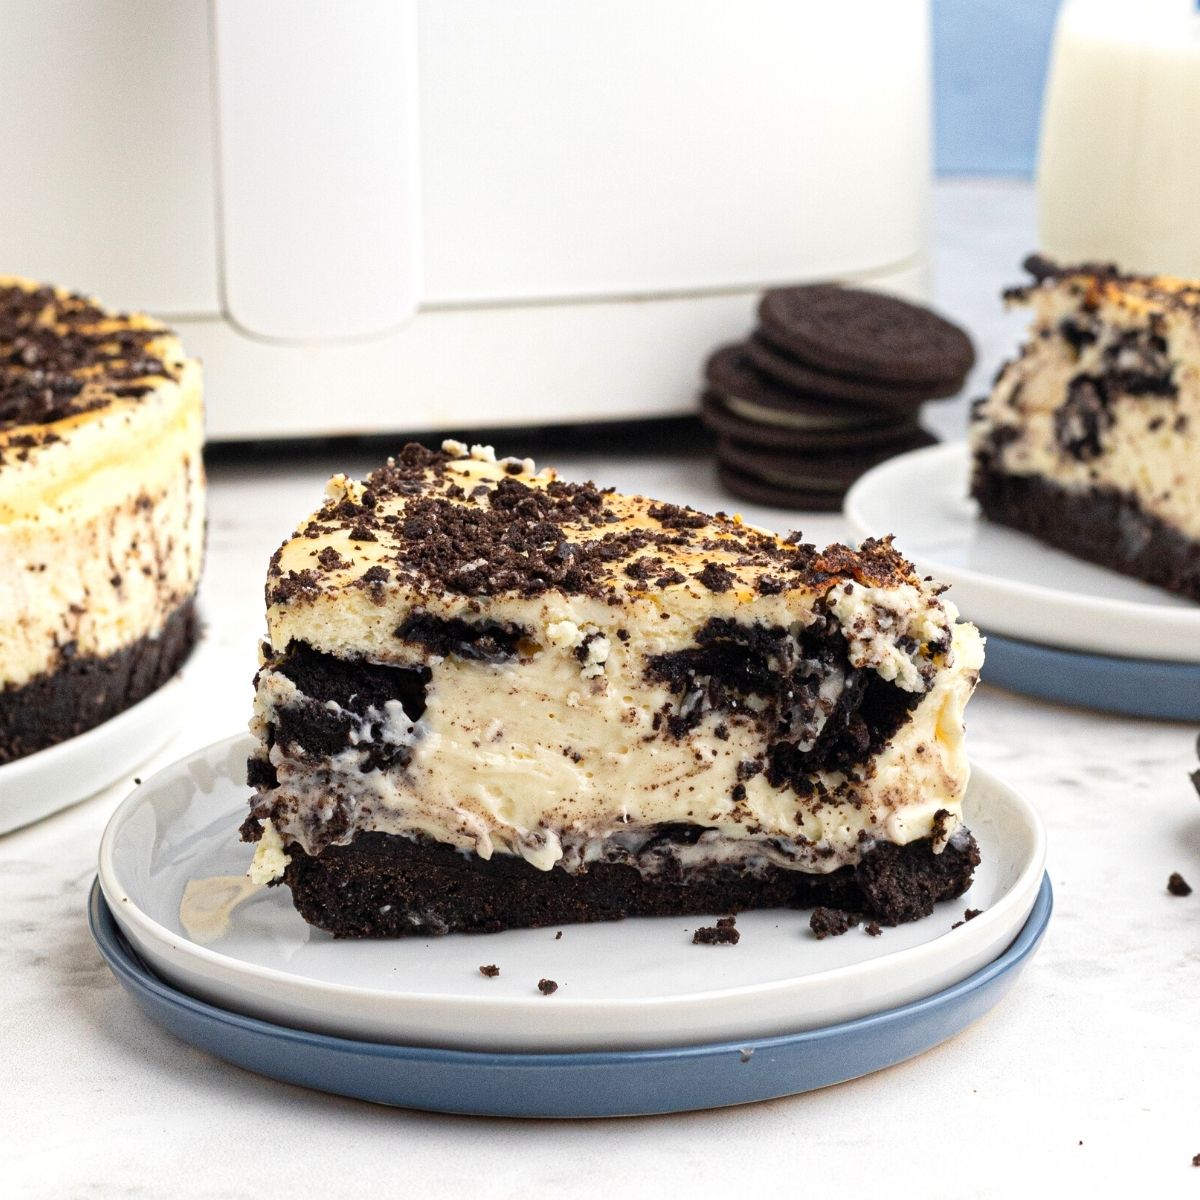 creamy slice of Oreo cheesecake served on a white plate in front of an air fryer.